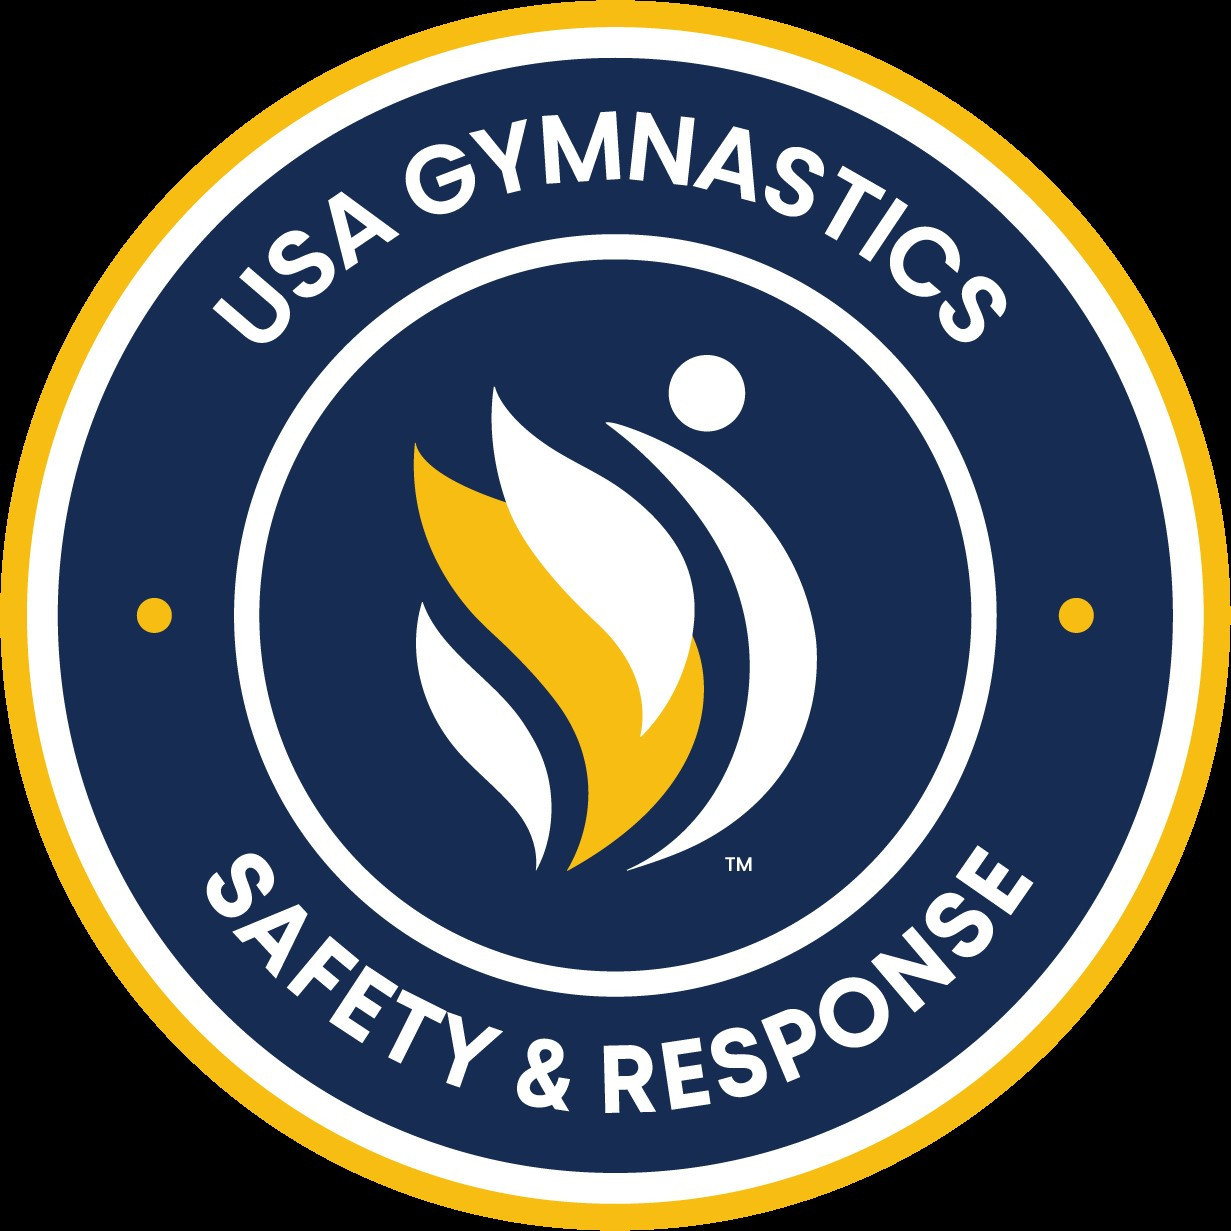 USA Gymnastics redesigns website and has new name for athlete safety department